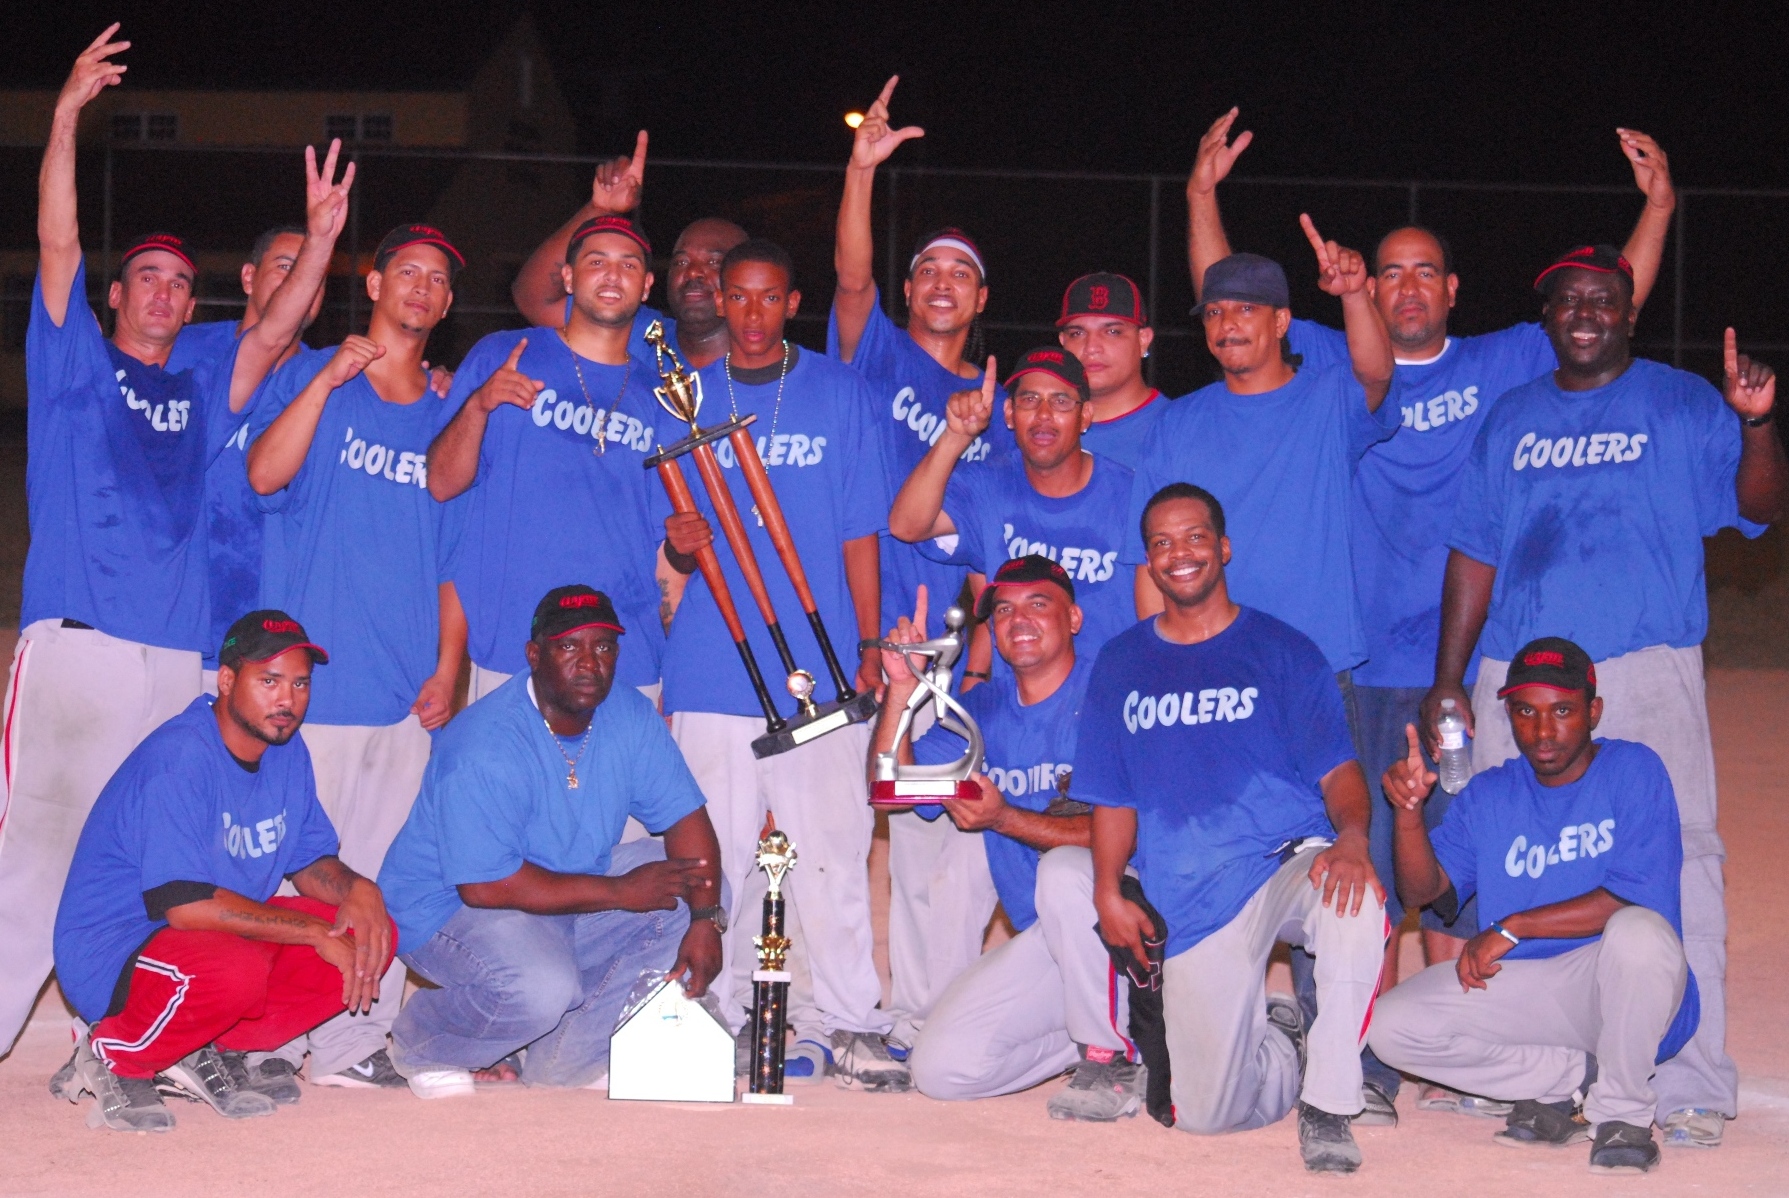 Coolers strikes a winning pose as they celebrate their 2011 Bob Owens Championship.